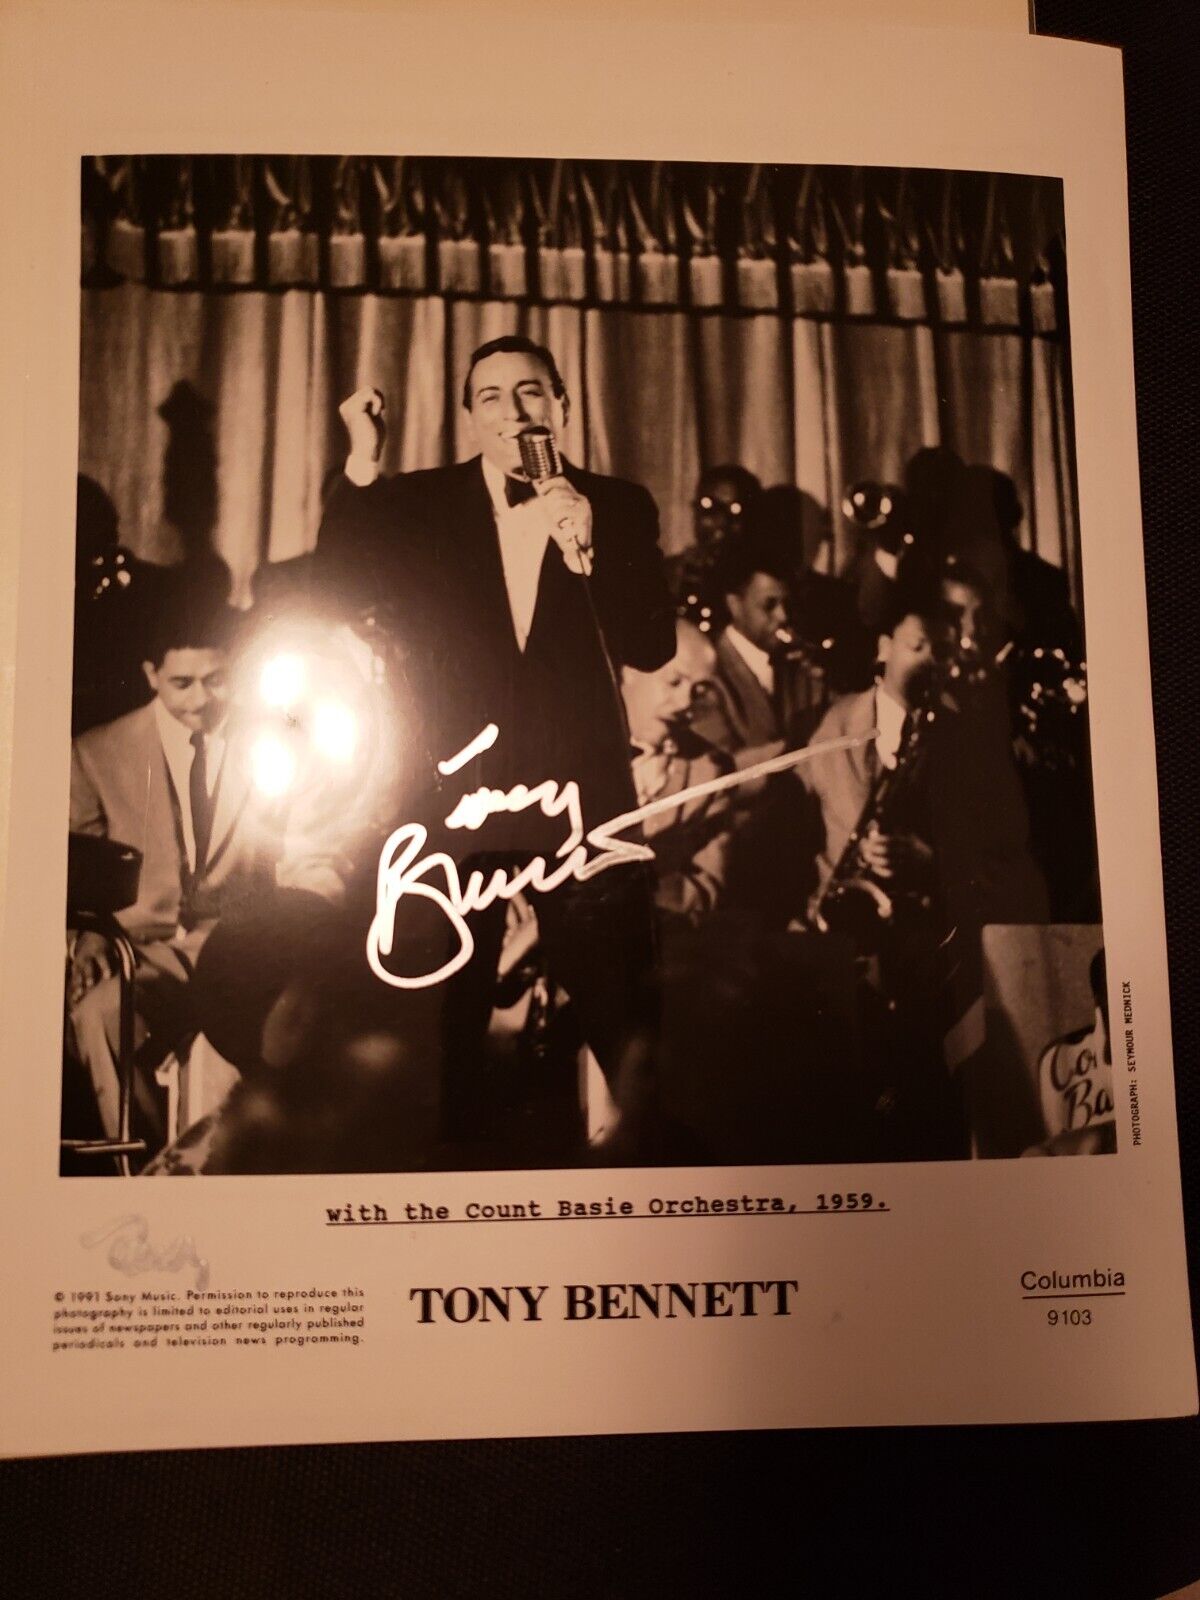 TONY BENNETT SIGNED AUTO 1959 Promo Press Photo 8x10 with Count Basie Orchestra